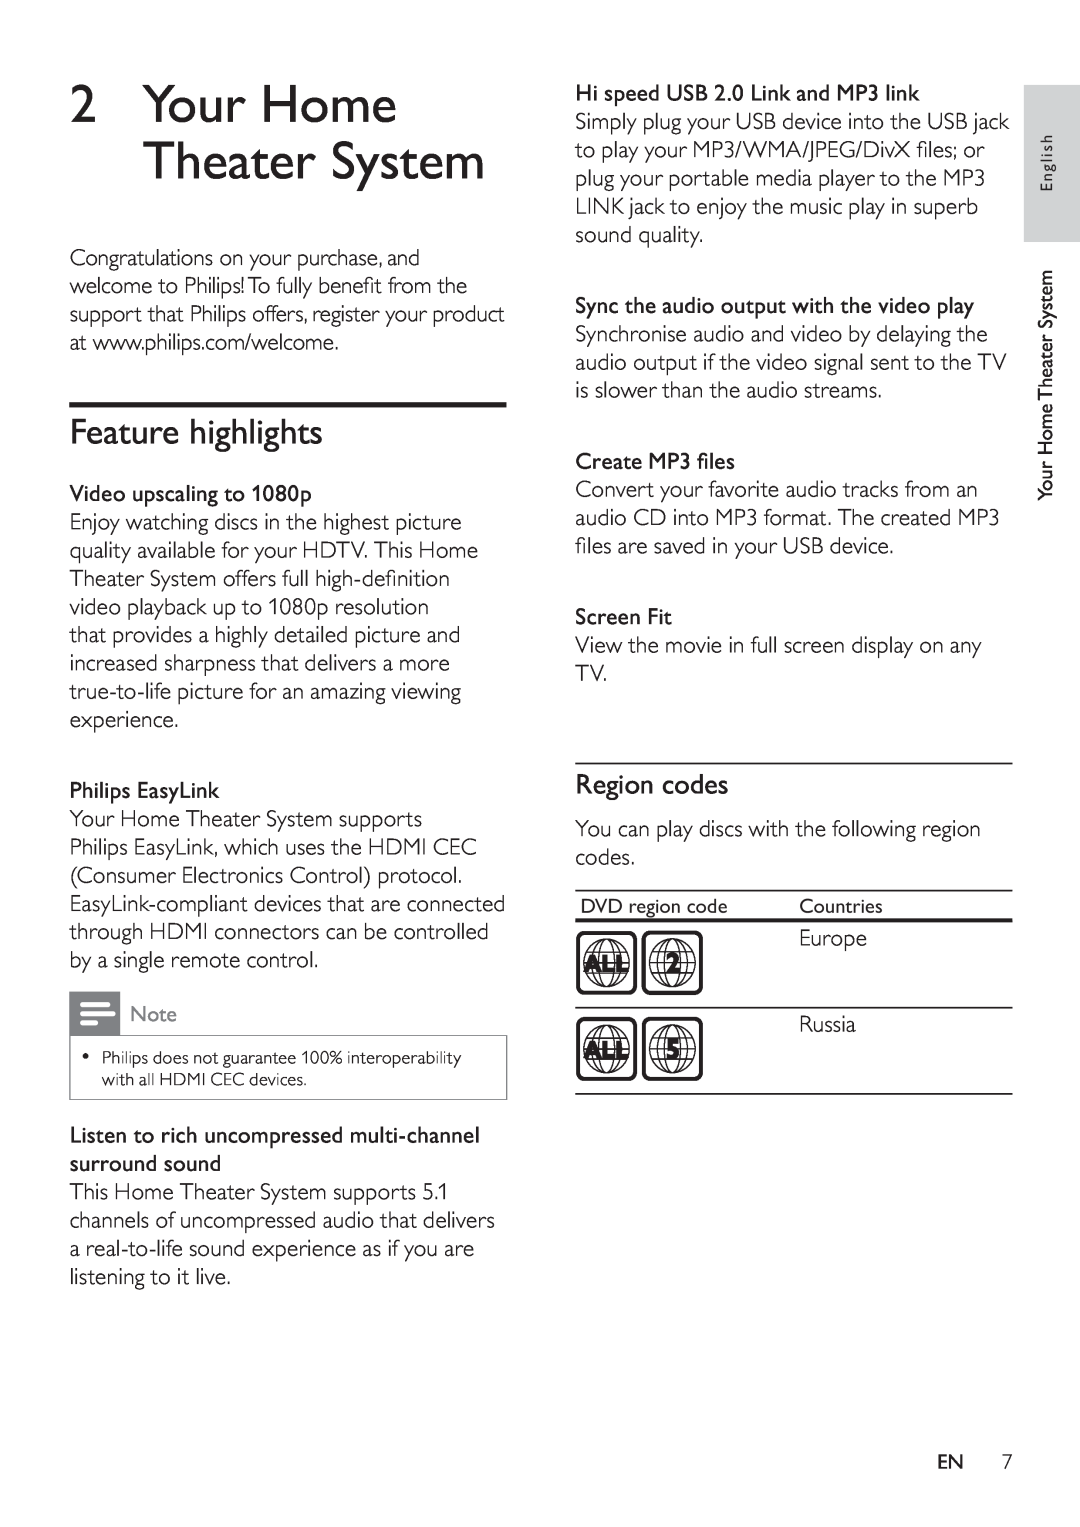 Philips HTS3377W, HTS3270 user manual 2Your Home Theater System, Feature highlights, Region codes 